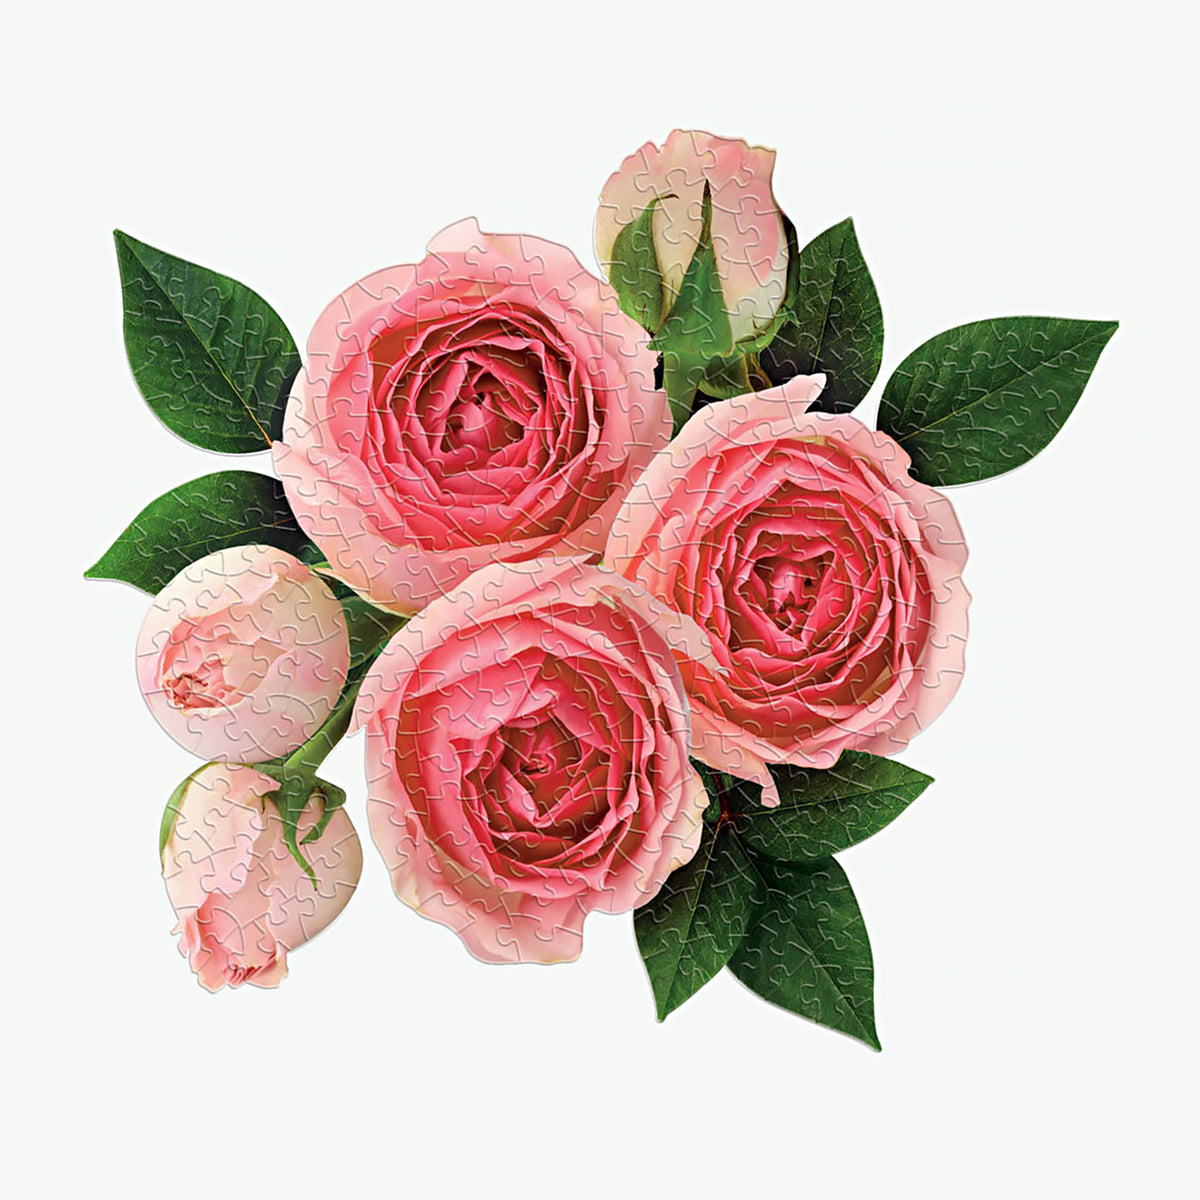 This unique flower-shaped jigsaw puzzle will make the perfect gift for Valentine's Day 2023.